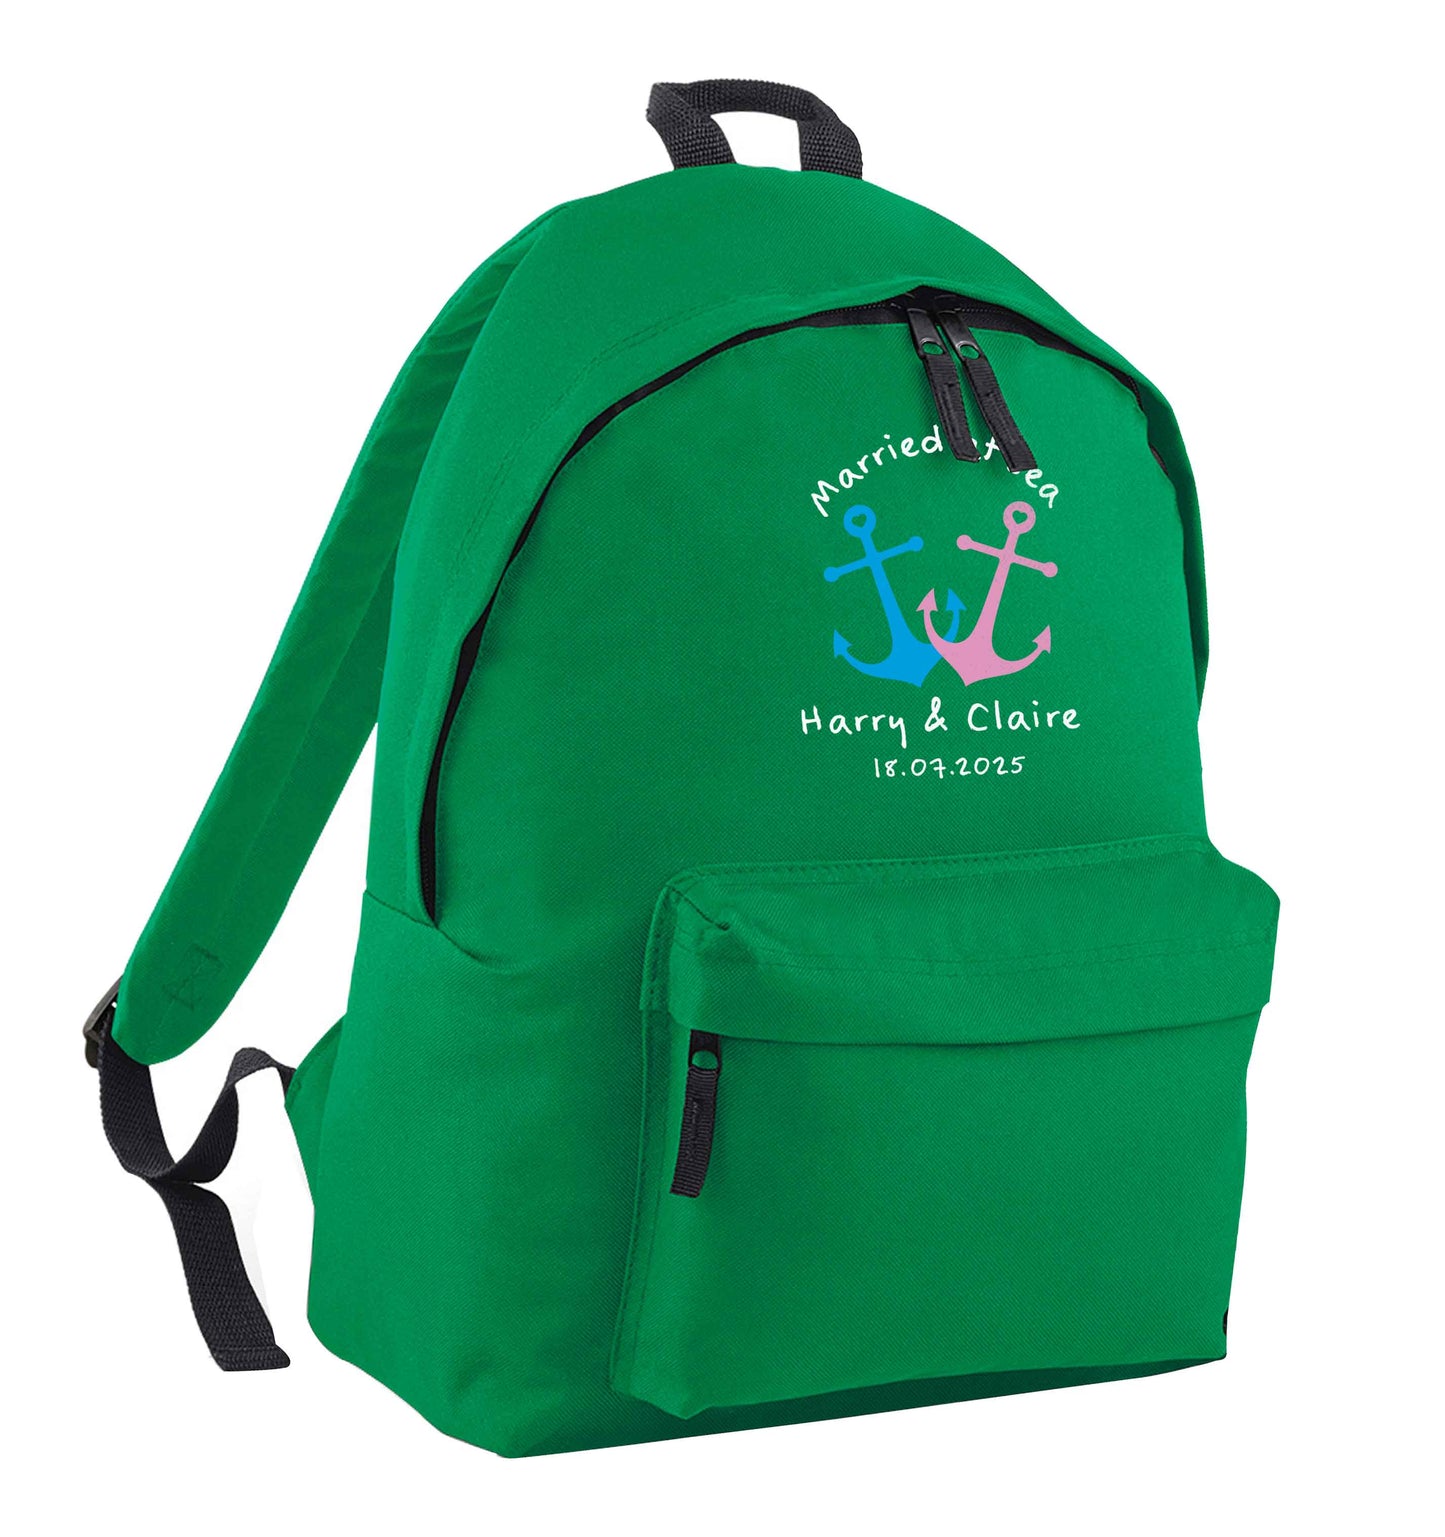 Married at sea green adults backpack